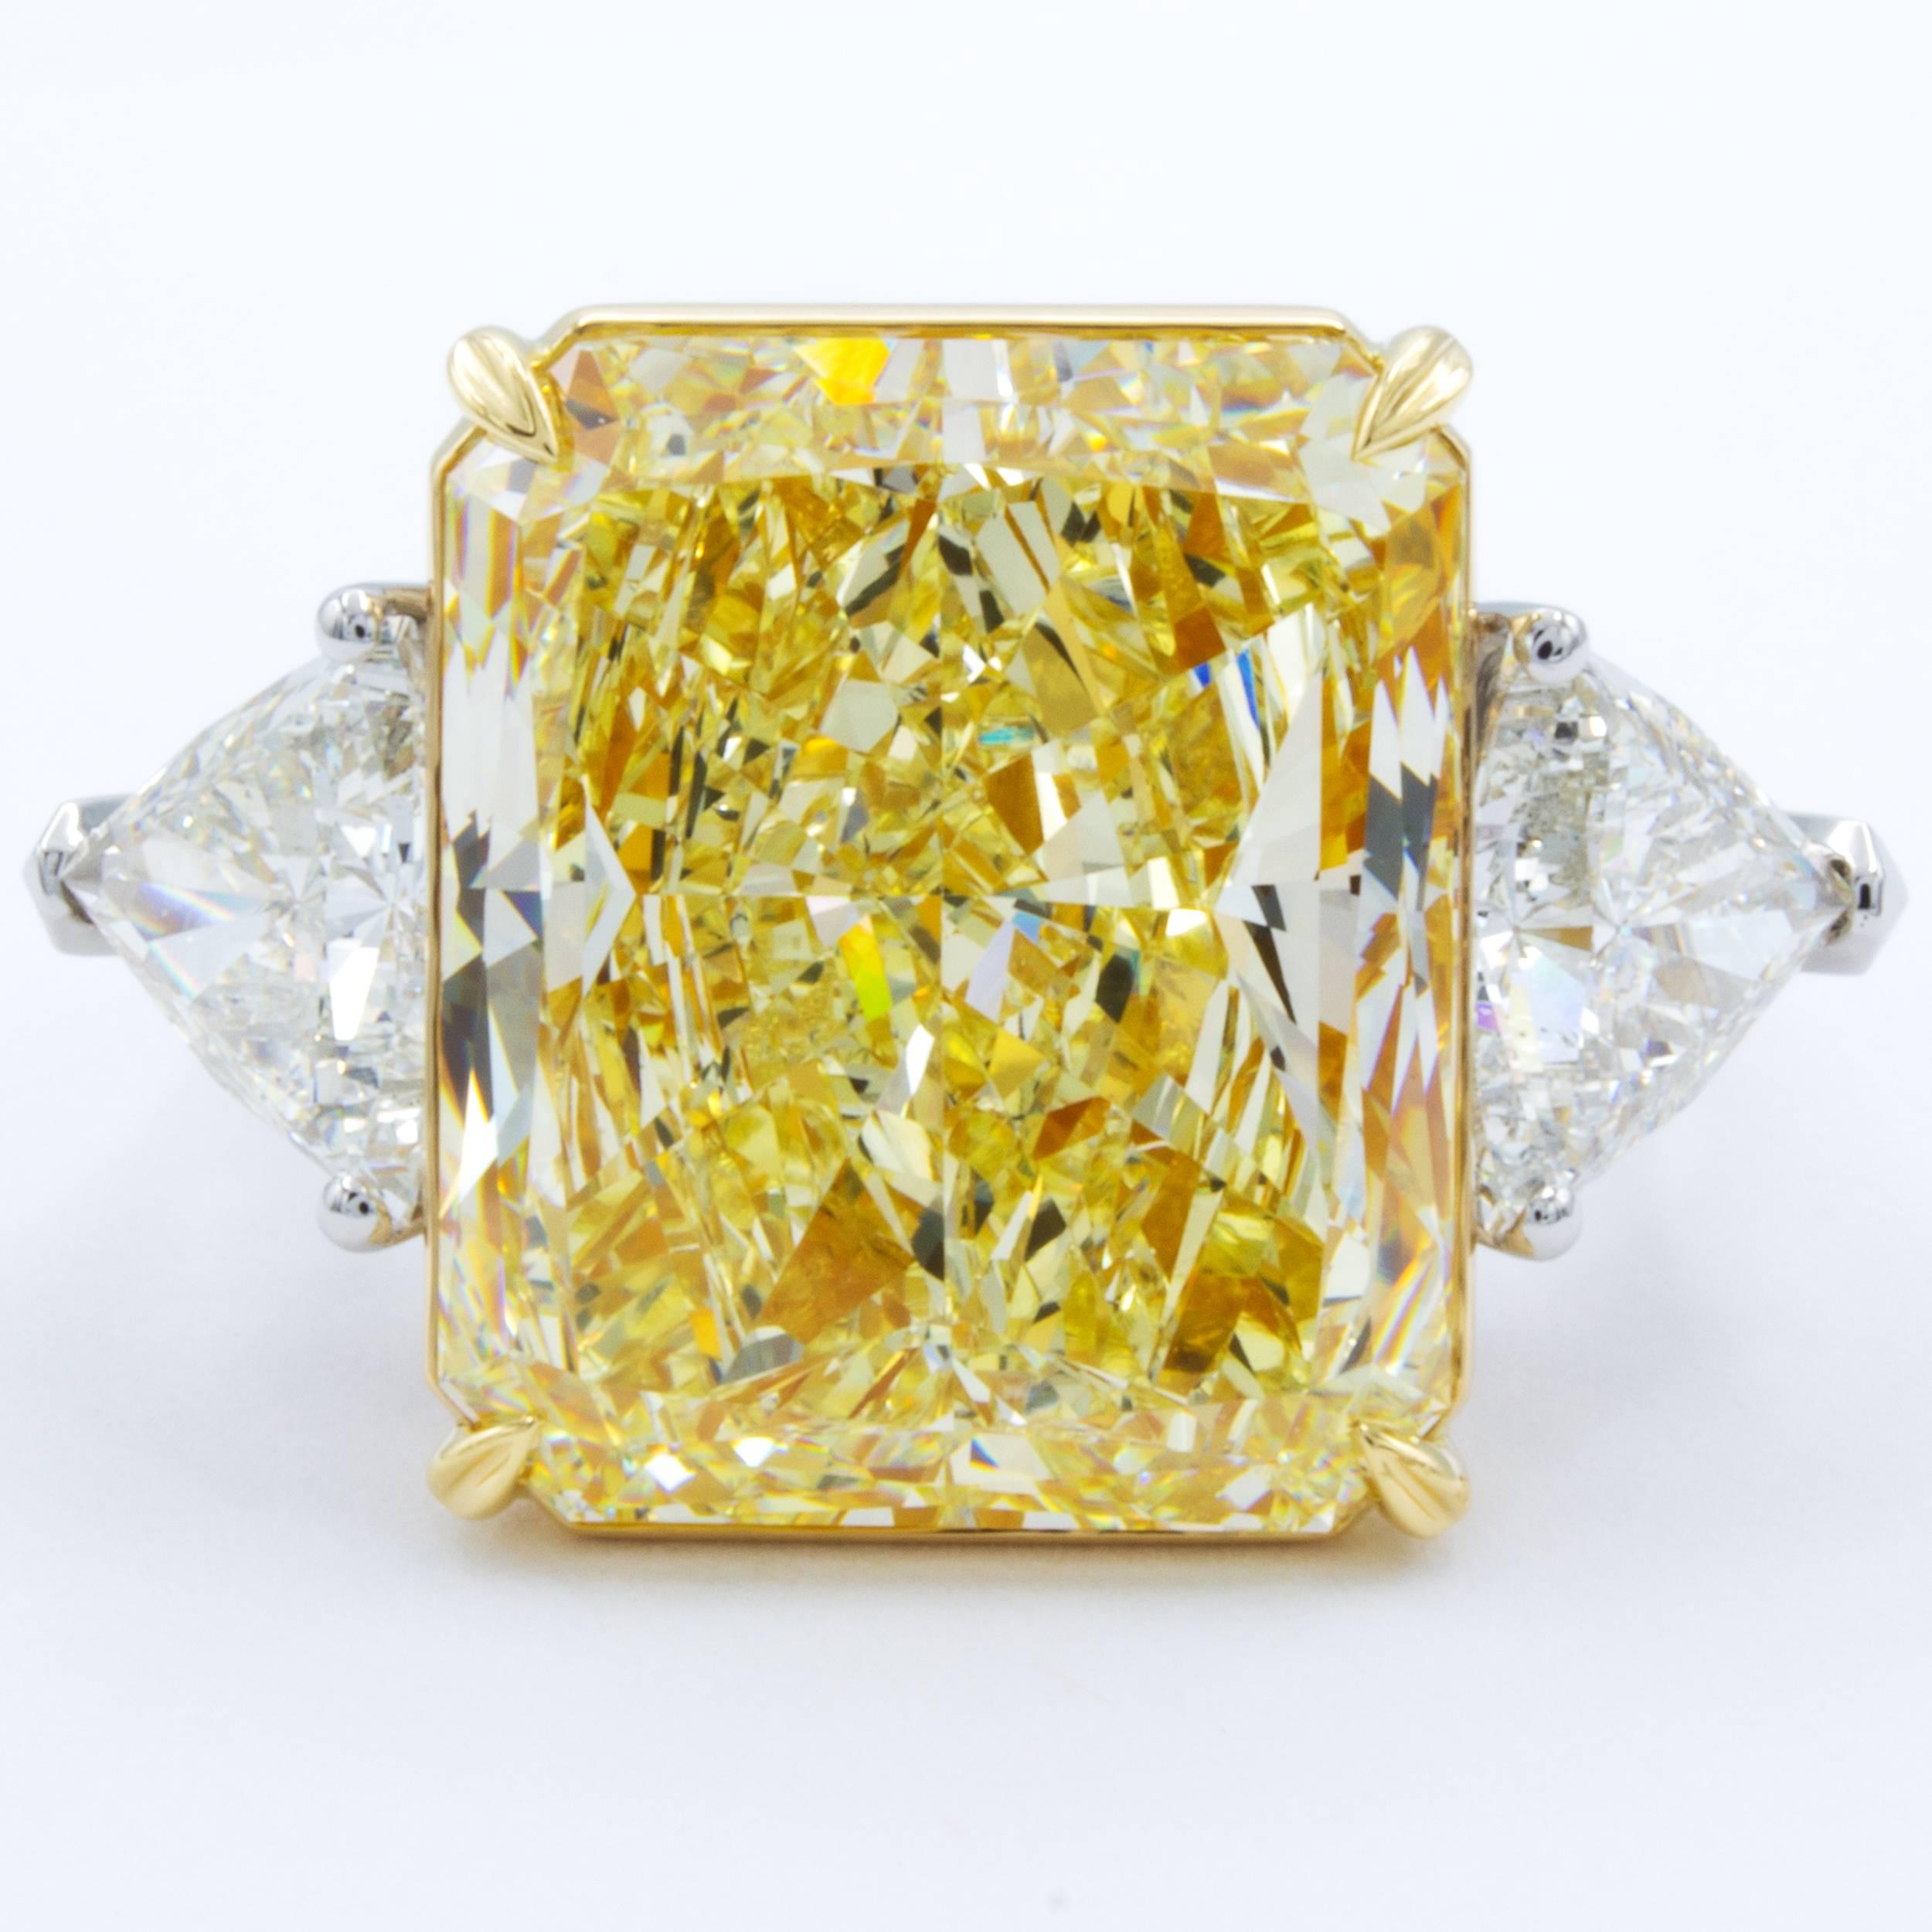 Rosenberg Diamonds & Co. 15.34 carat Radiant cut Fancy Light Yellow VS1 clarity is accompanied by a GIA certificate. This Exceptionally rare Radiant is full of brilliance and it is set in a handmade platinum and 18 karat yellow gold setting with